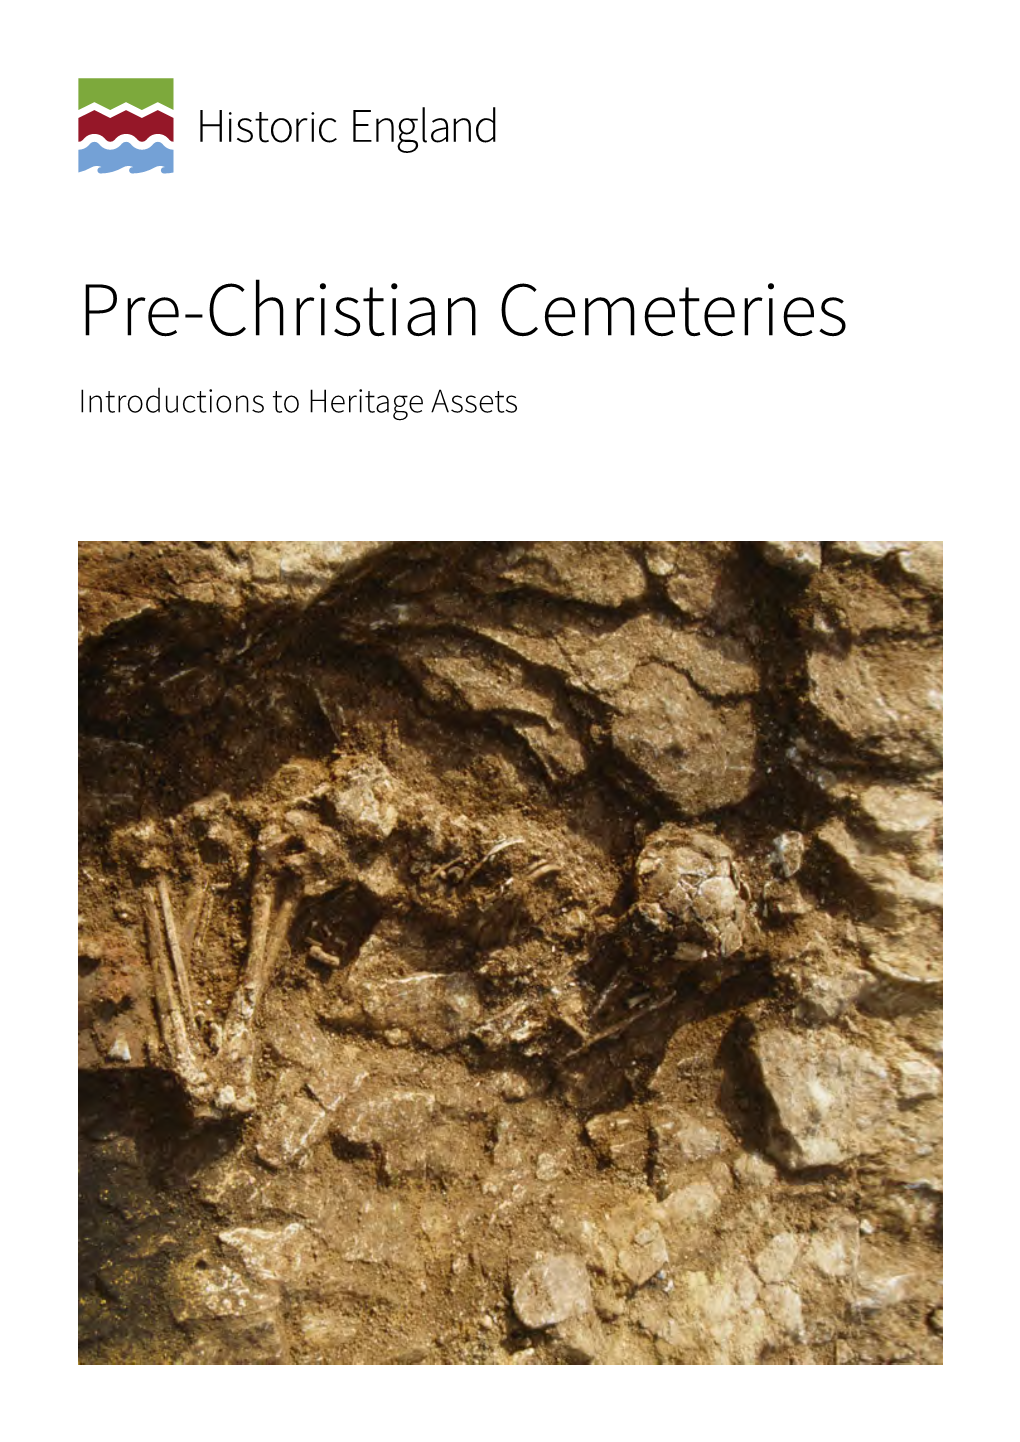 Pre-Christian Cemeteries Introductions to Heritage Assets Summary